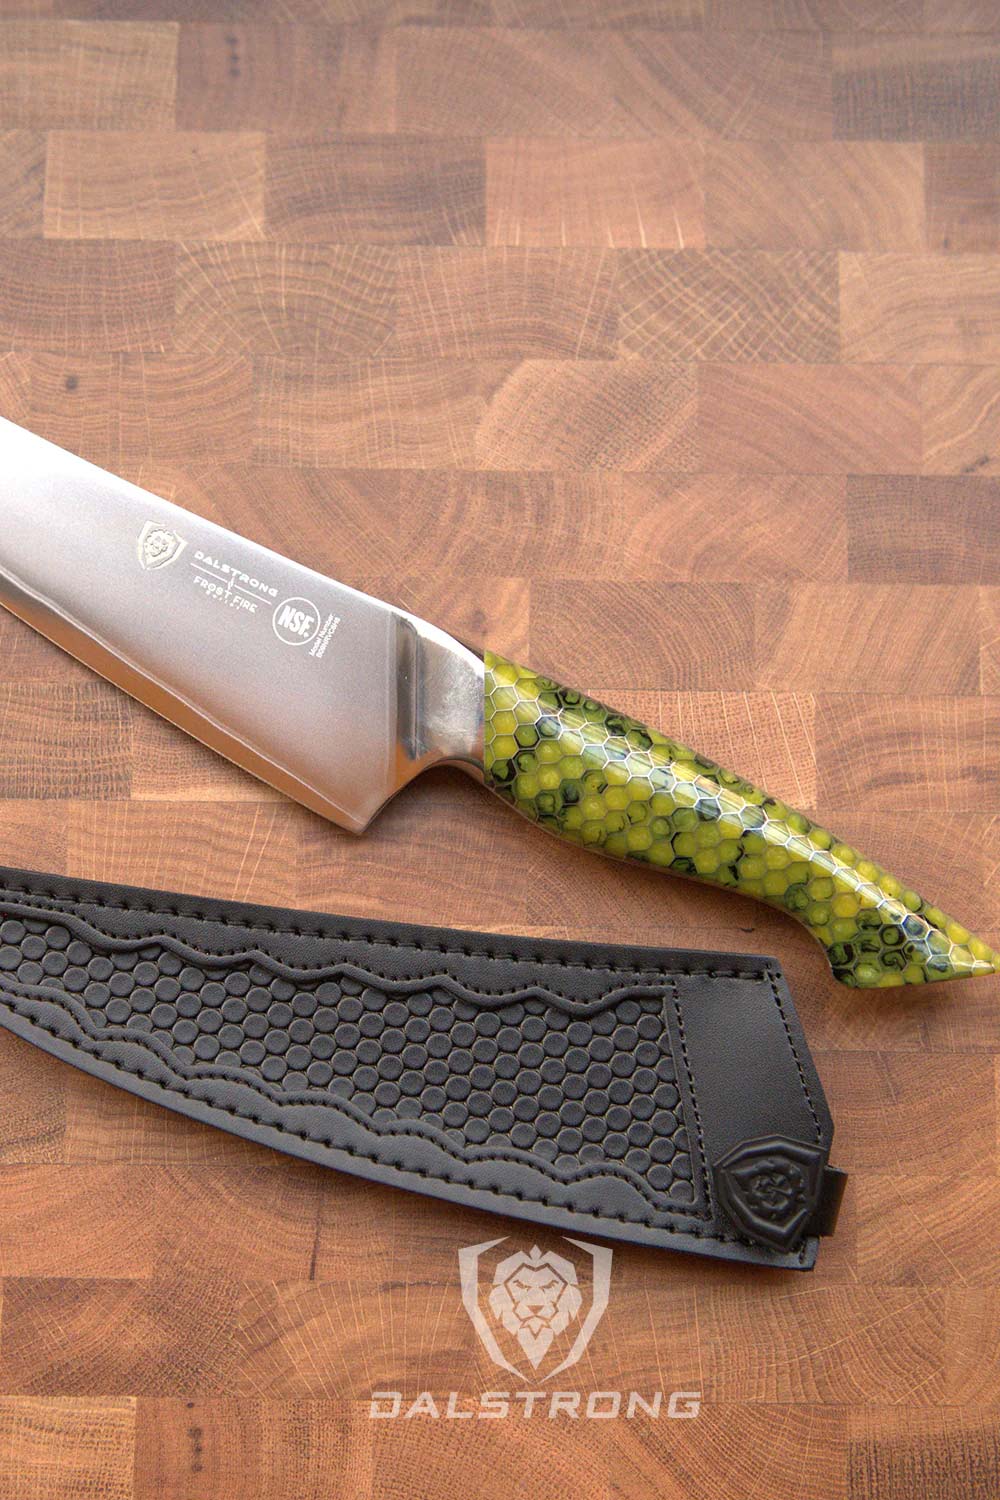 Dalstrong frost fire series 8 inch chef knife with dragon skin handle and it's black sheath.